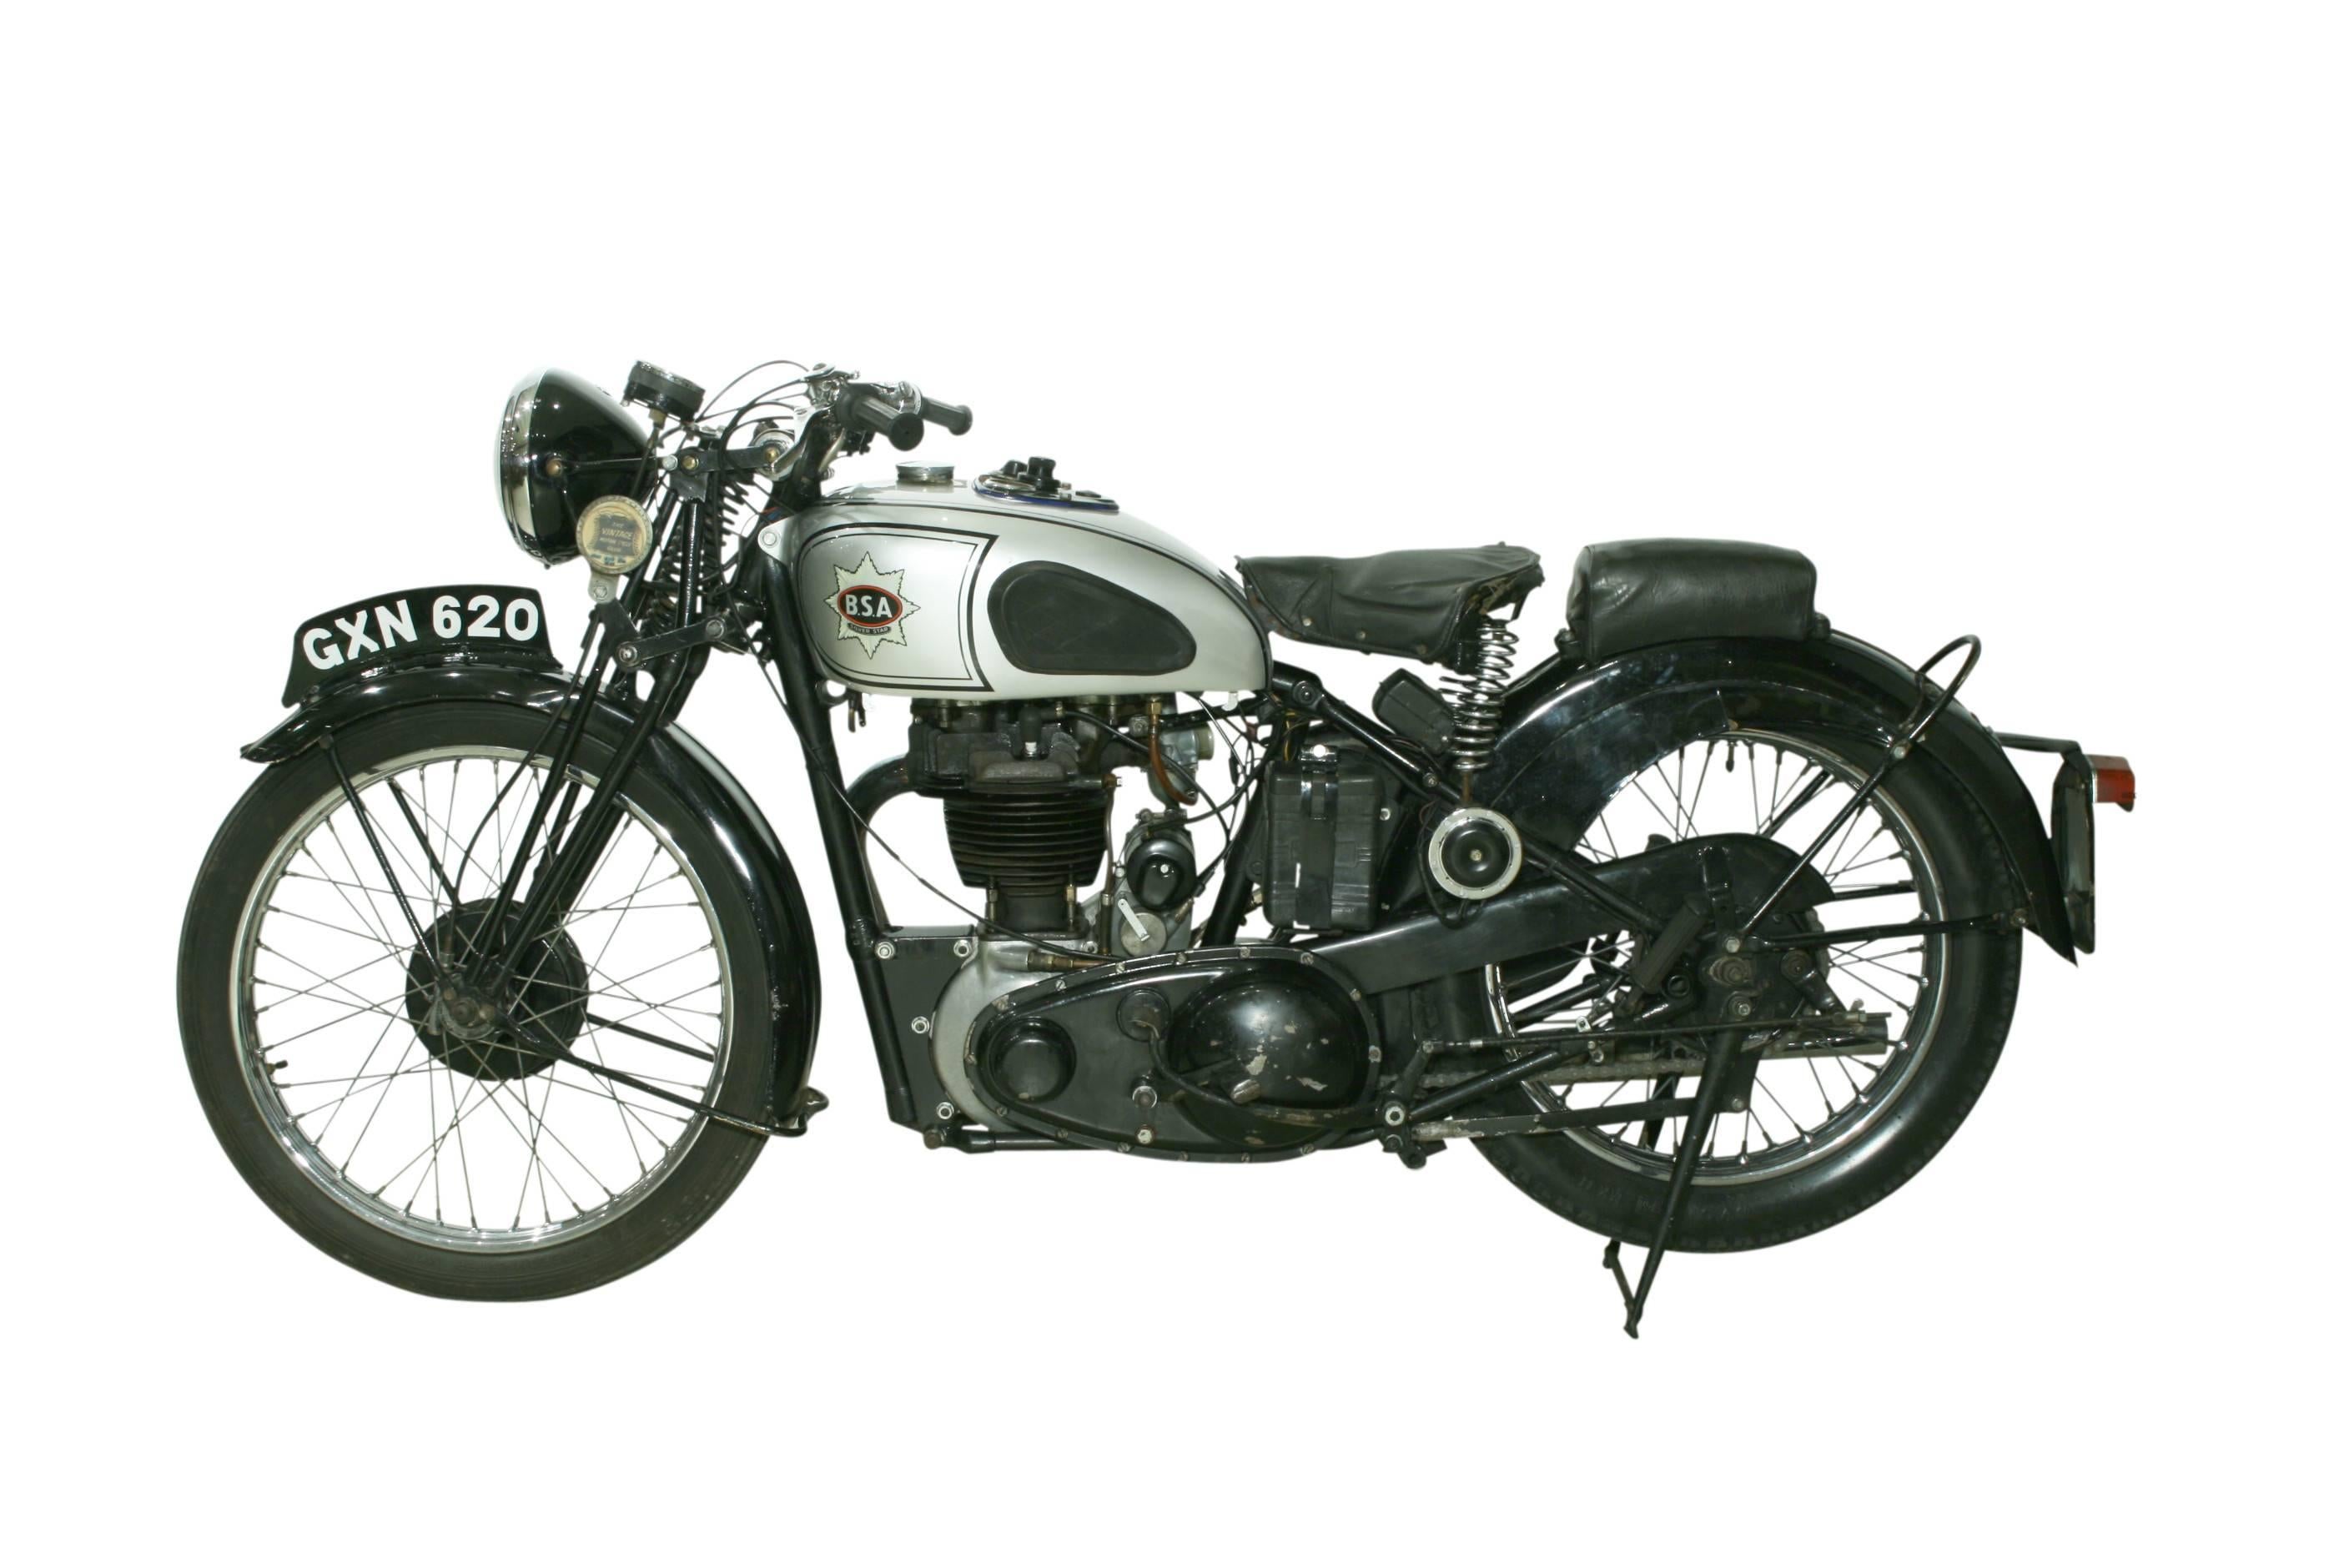 1939 BSA M23 Silver Star. 
A very good pre-war BSA Silver Star motorcycle. The bike is painted in black and silver, equipped with a solo and pillion saddle and a 500cc OHV single cylinder engine with a 4 speed gear box. It has its original